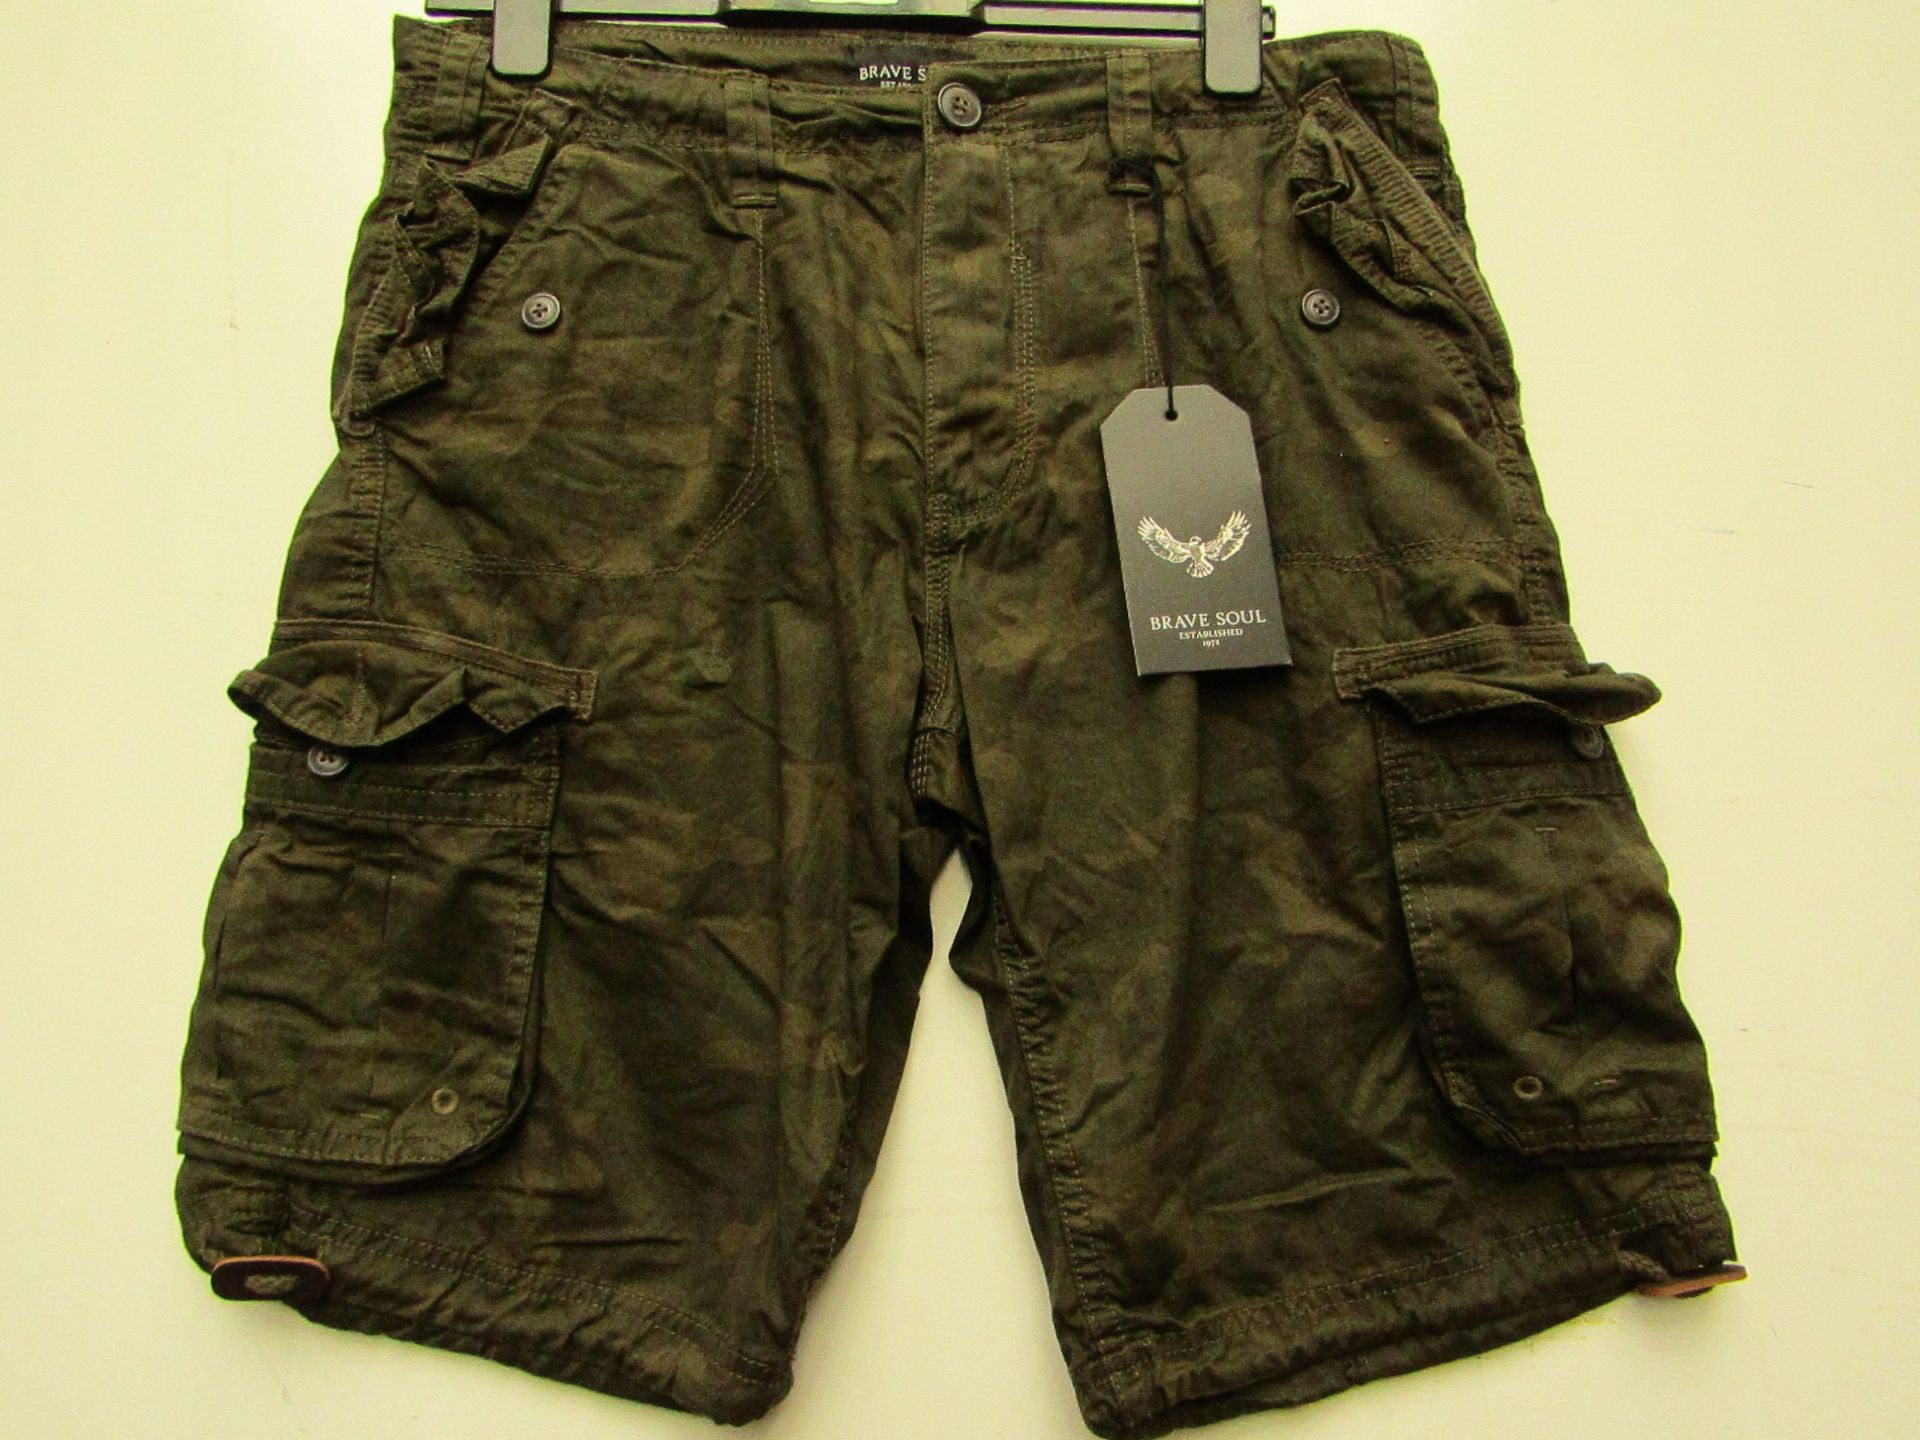 Brave Soul Mens Camo Cargo Shorts size M new with tag see image